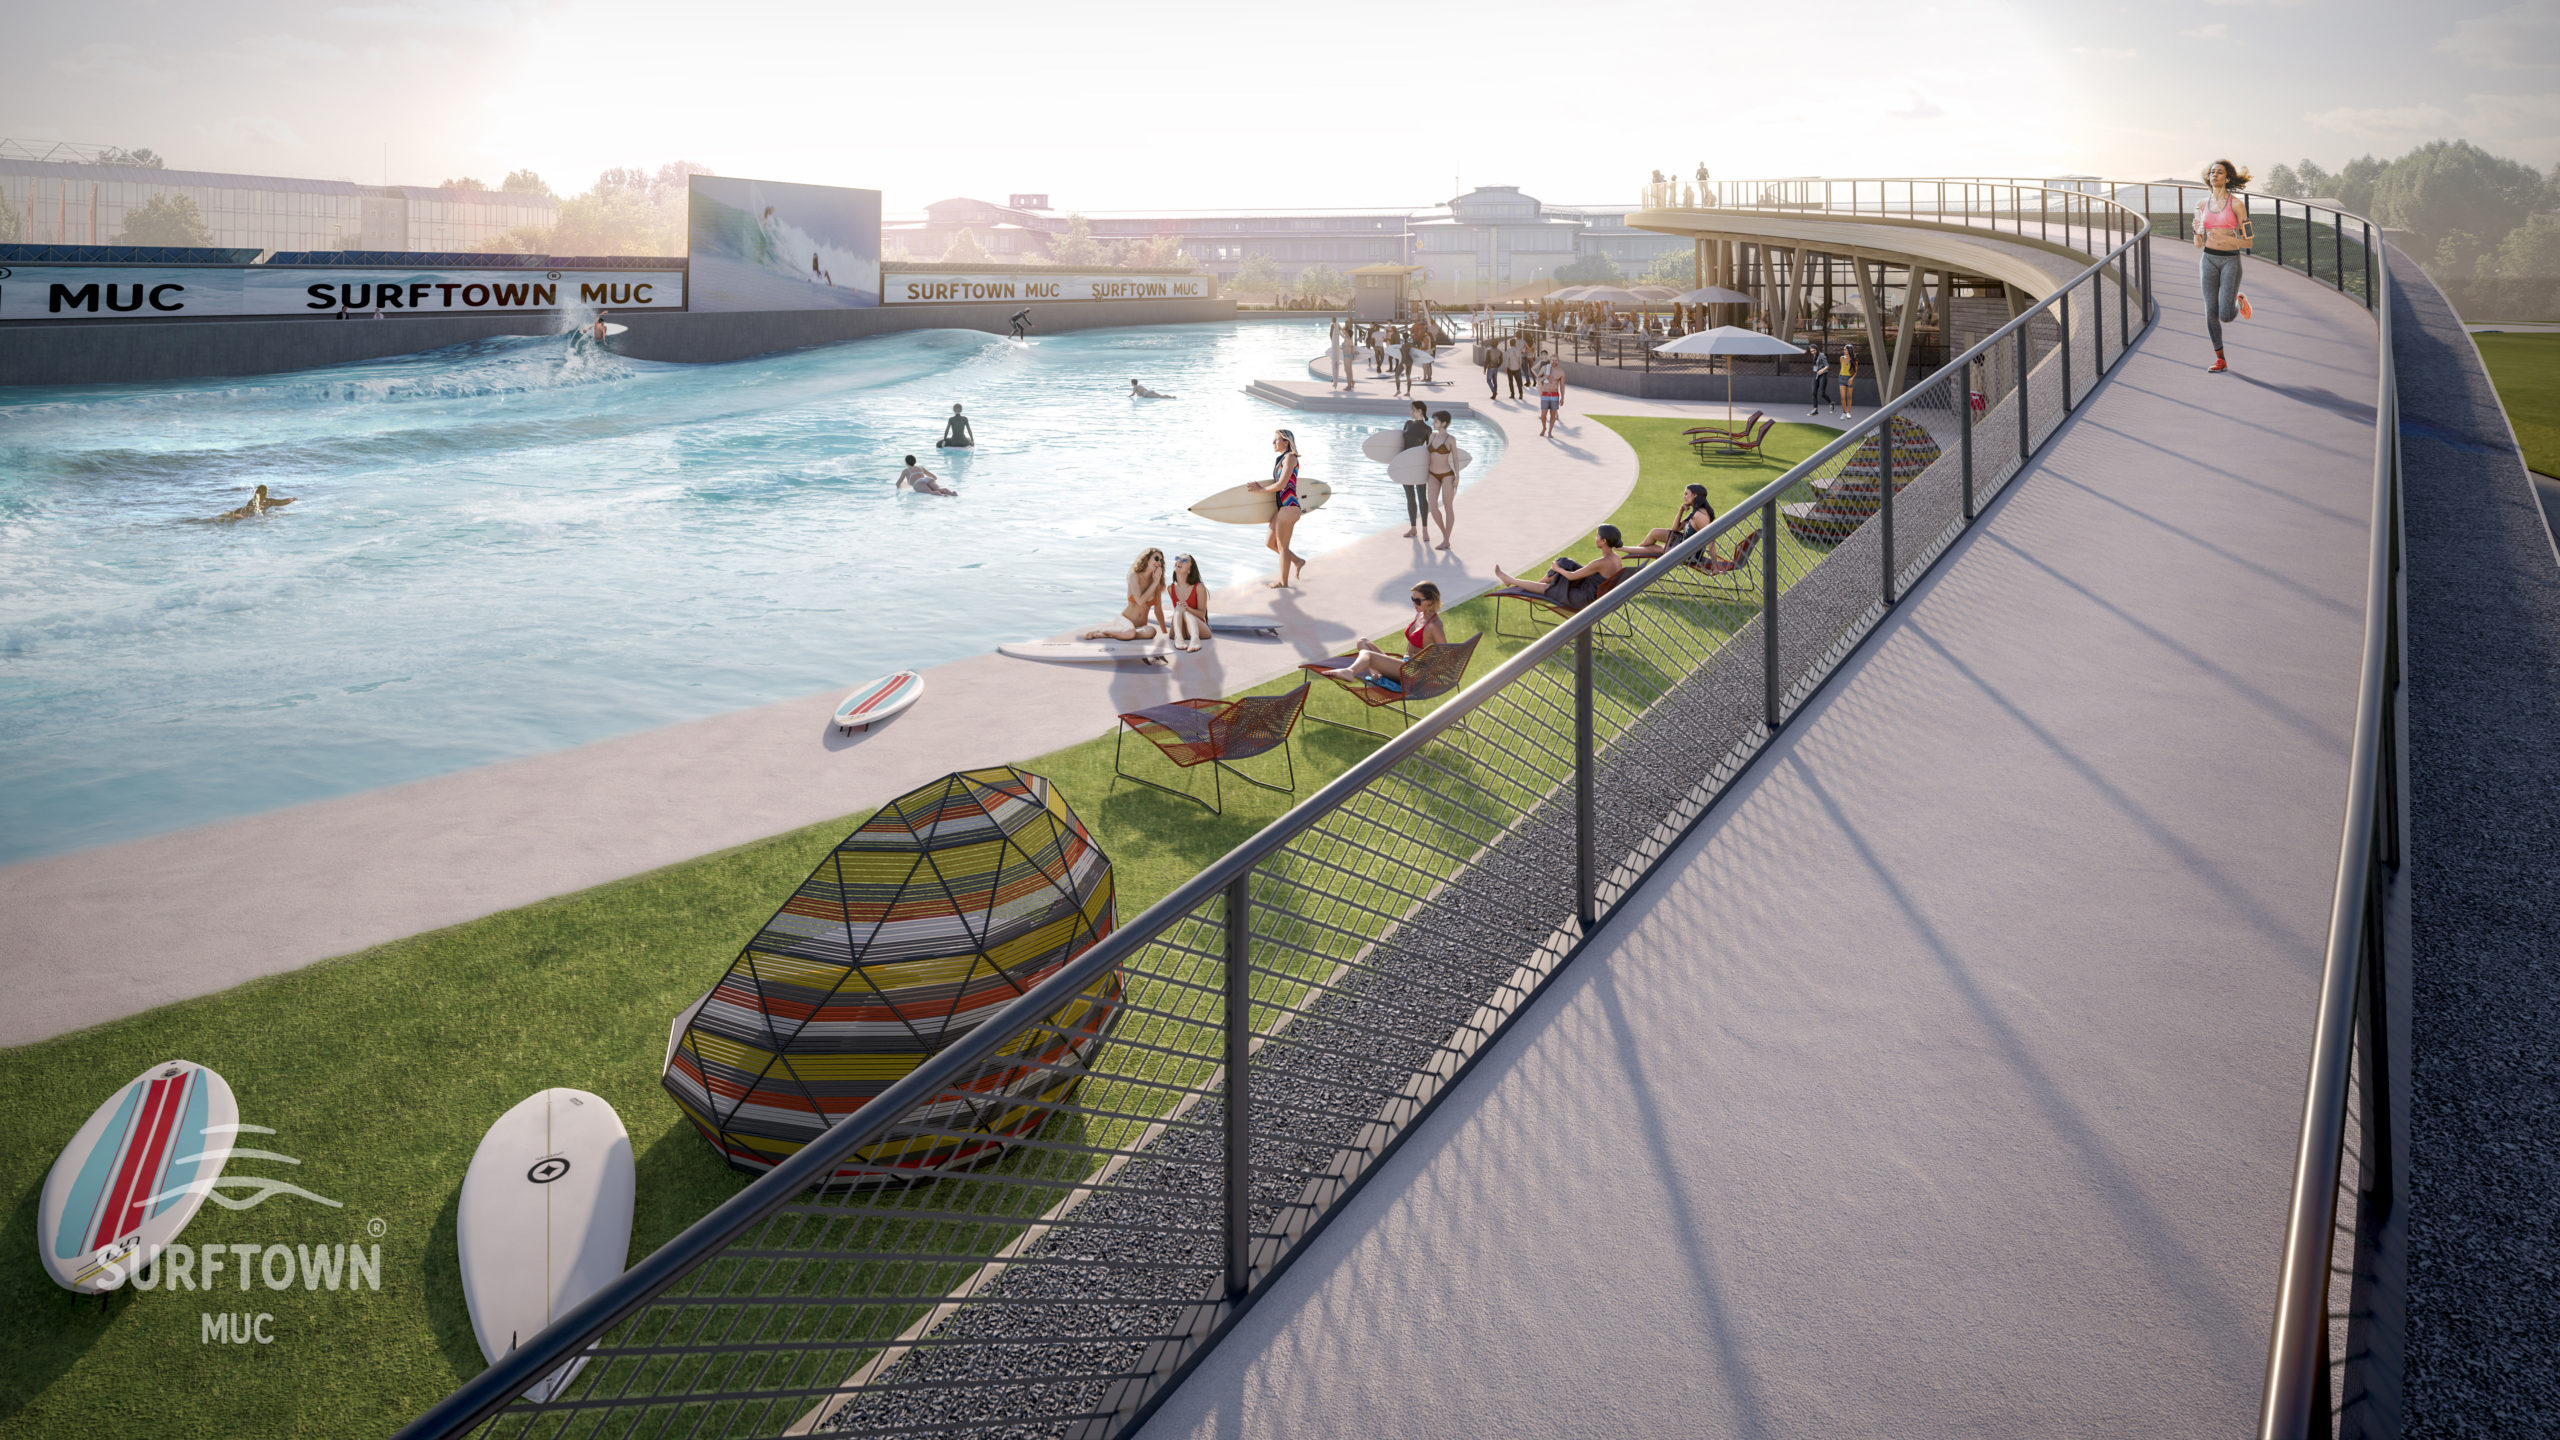 Conceptualization of the Beach at SURFTOWN MUC